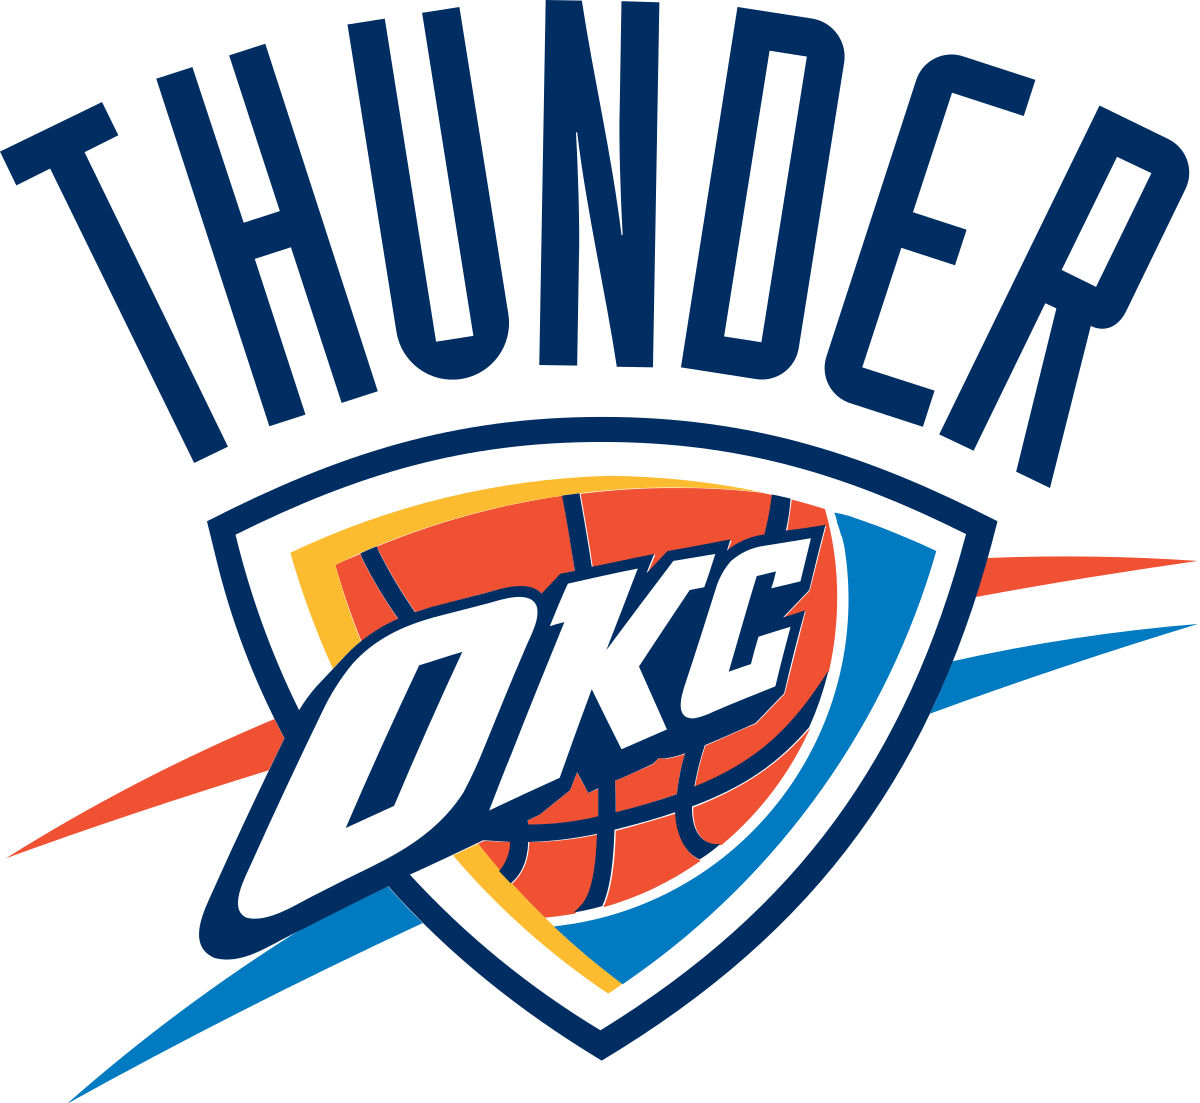 Oklahoma City Thunder 2021 Roster What Okc Looks Like After Trades And Free Agency Signings Essentiallysports